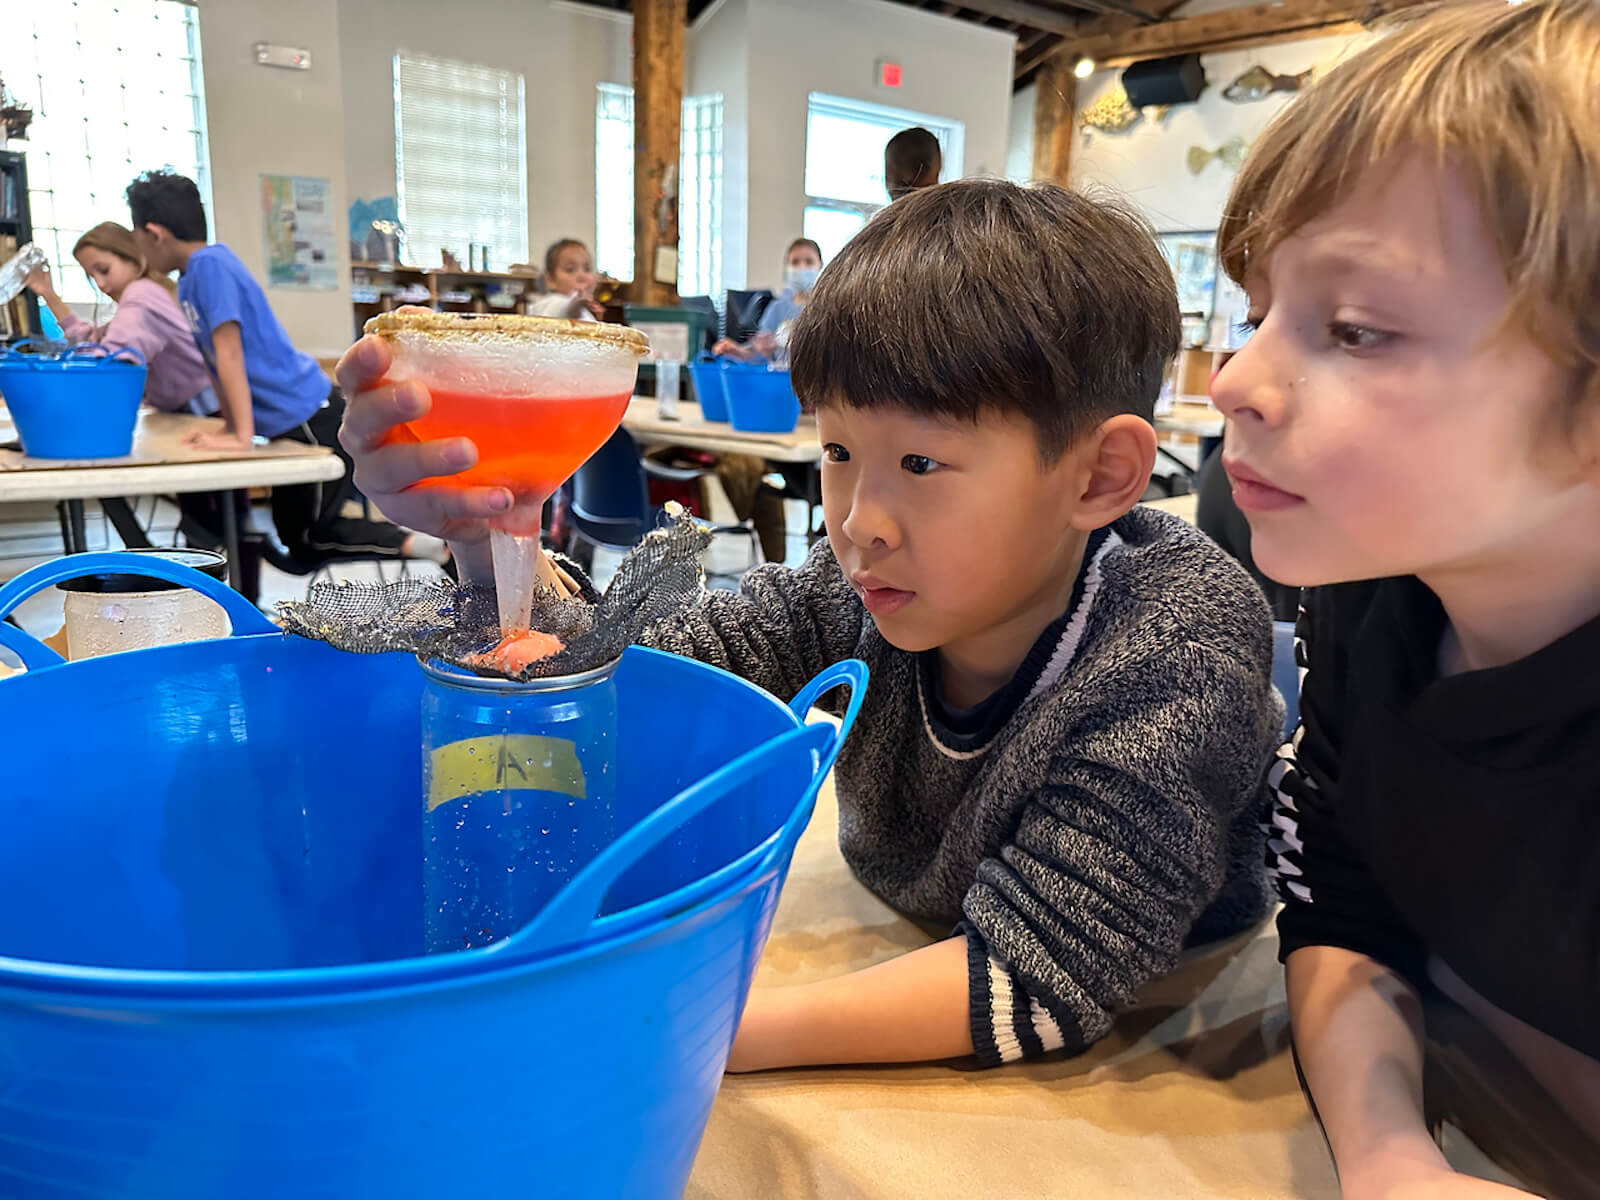 Fieldston Lower students clean water using a filter at the Beczak Center.